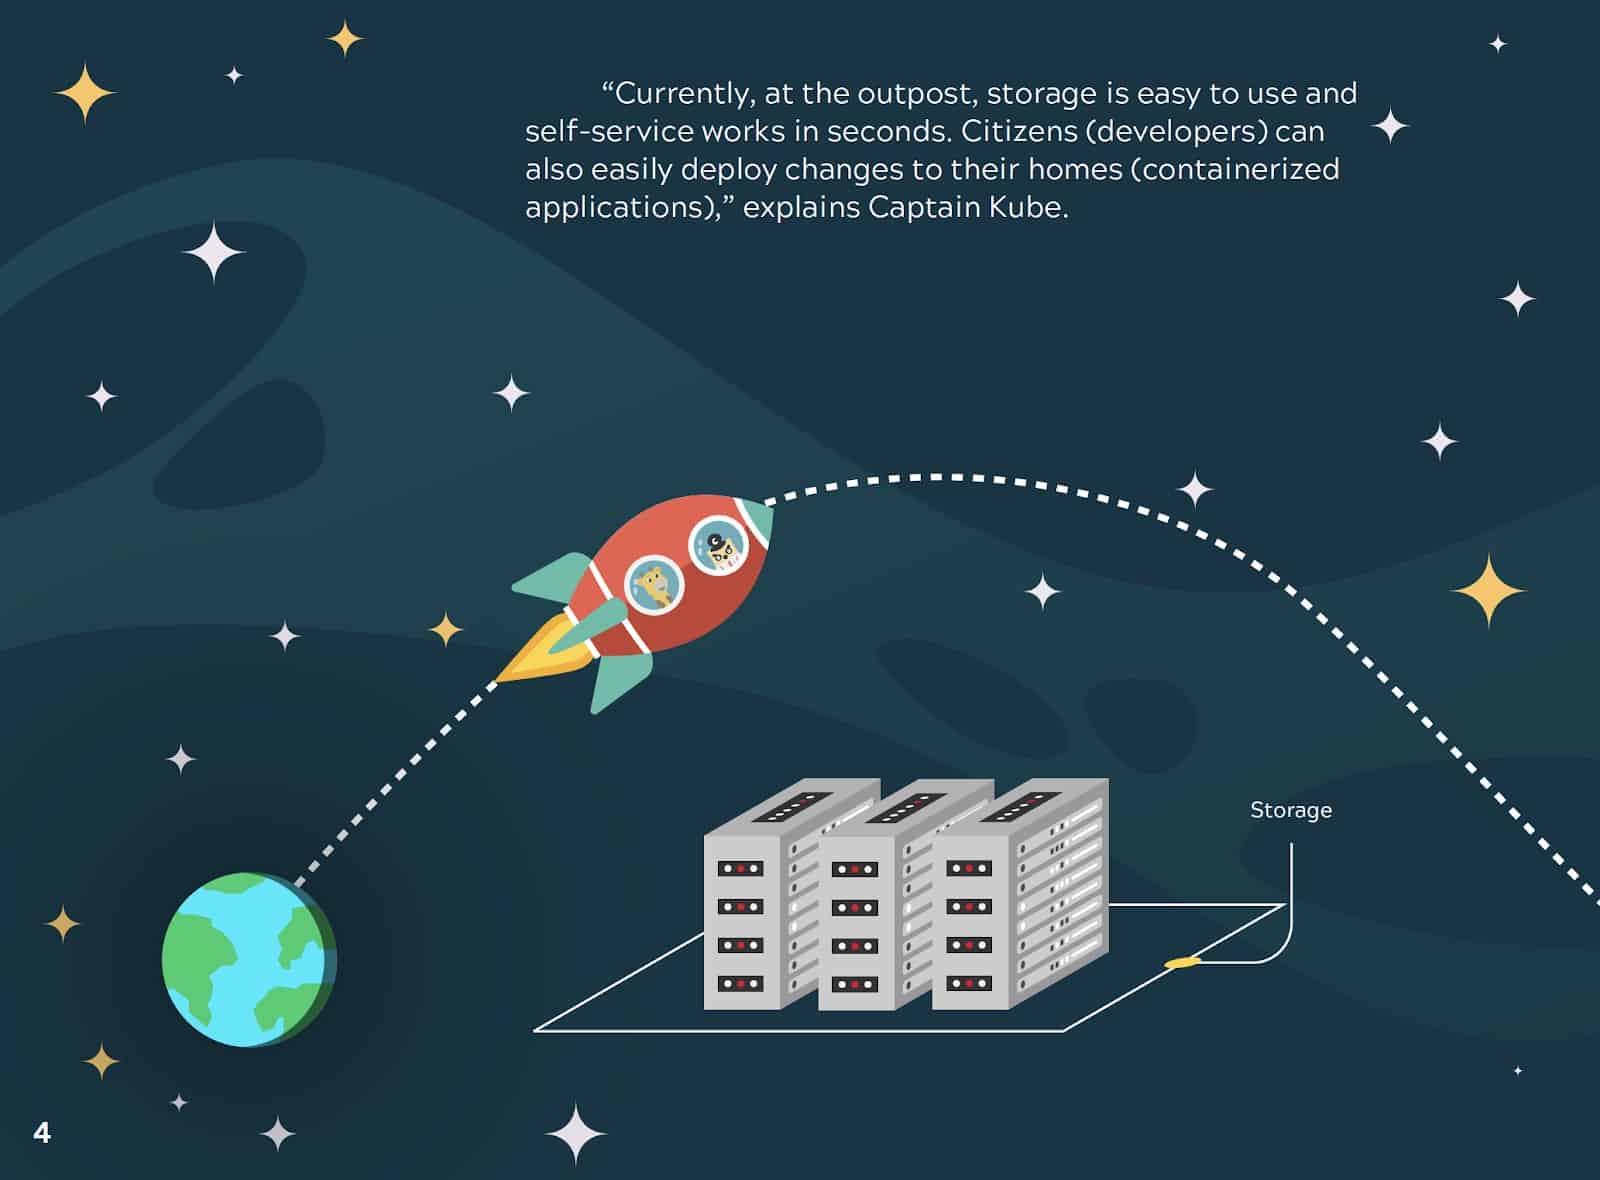 Phippy and Captain Kube flying in space passing storage. Captain Kube explains, "Currently, at the outpost, storage is easy to use and self-service works in seconds. Citizens (developers) can also easily deploy changes to their homes (containerized applications)".